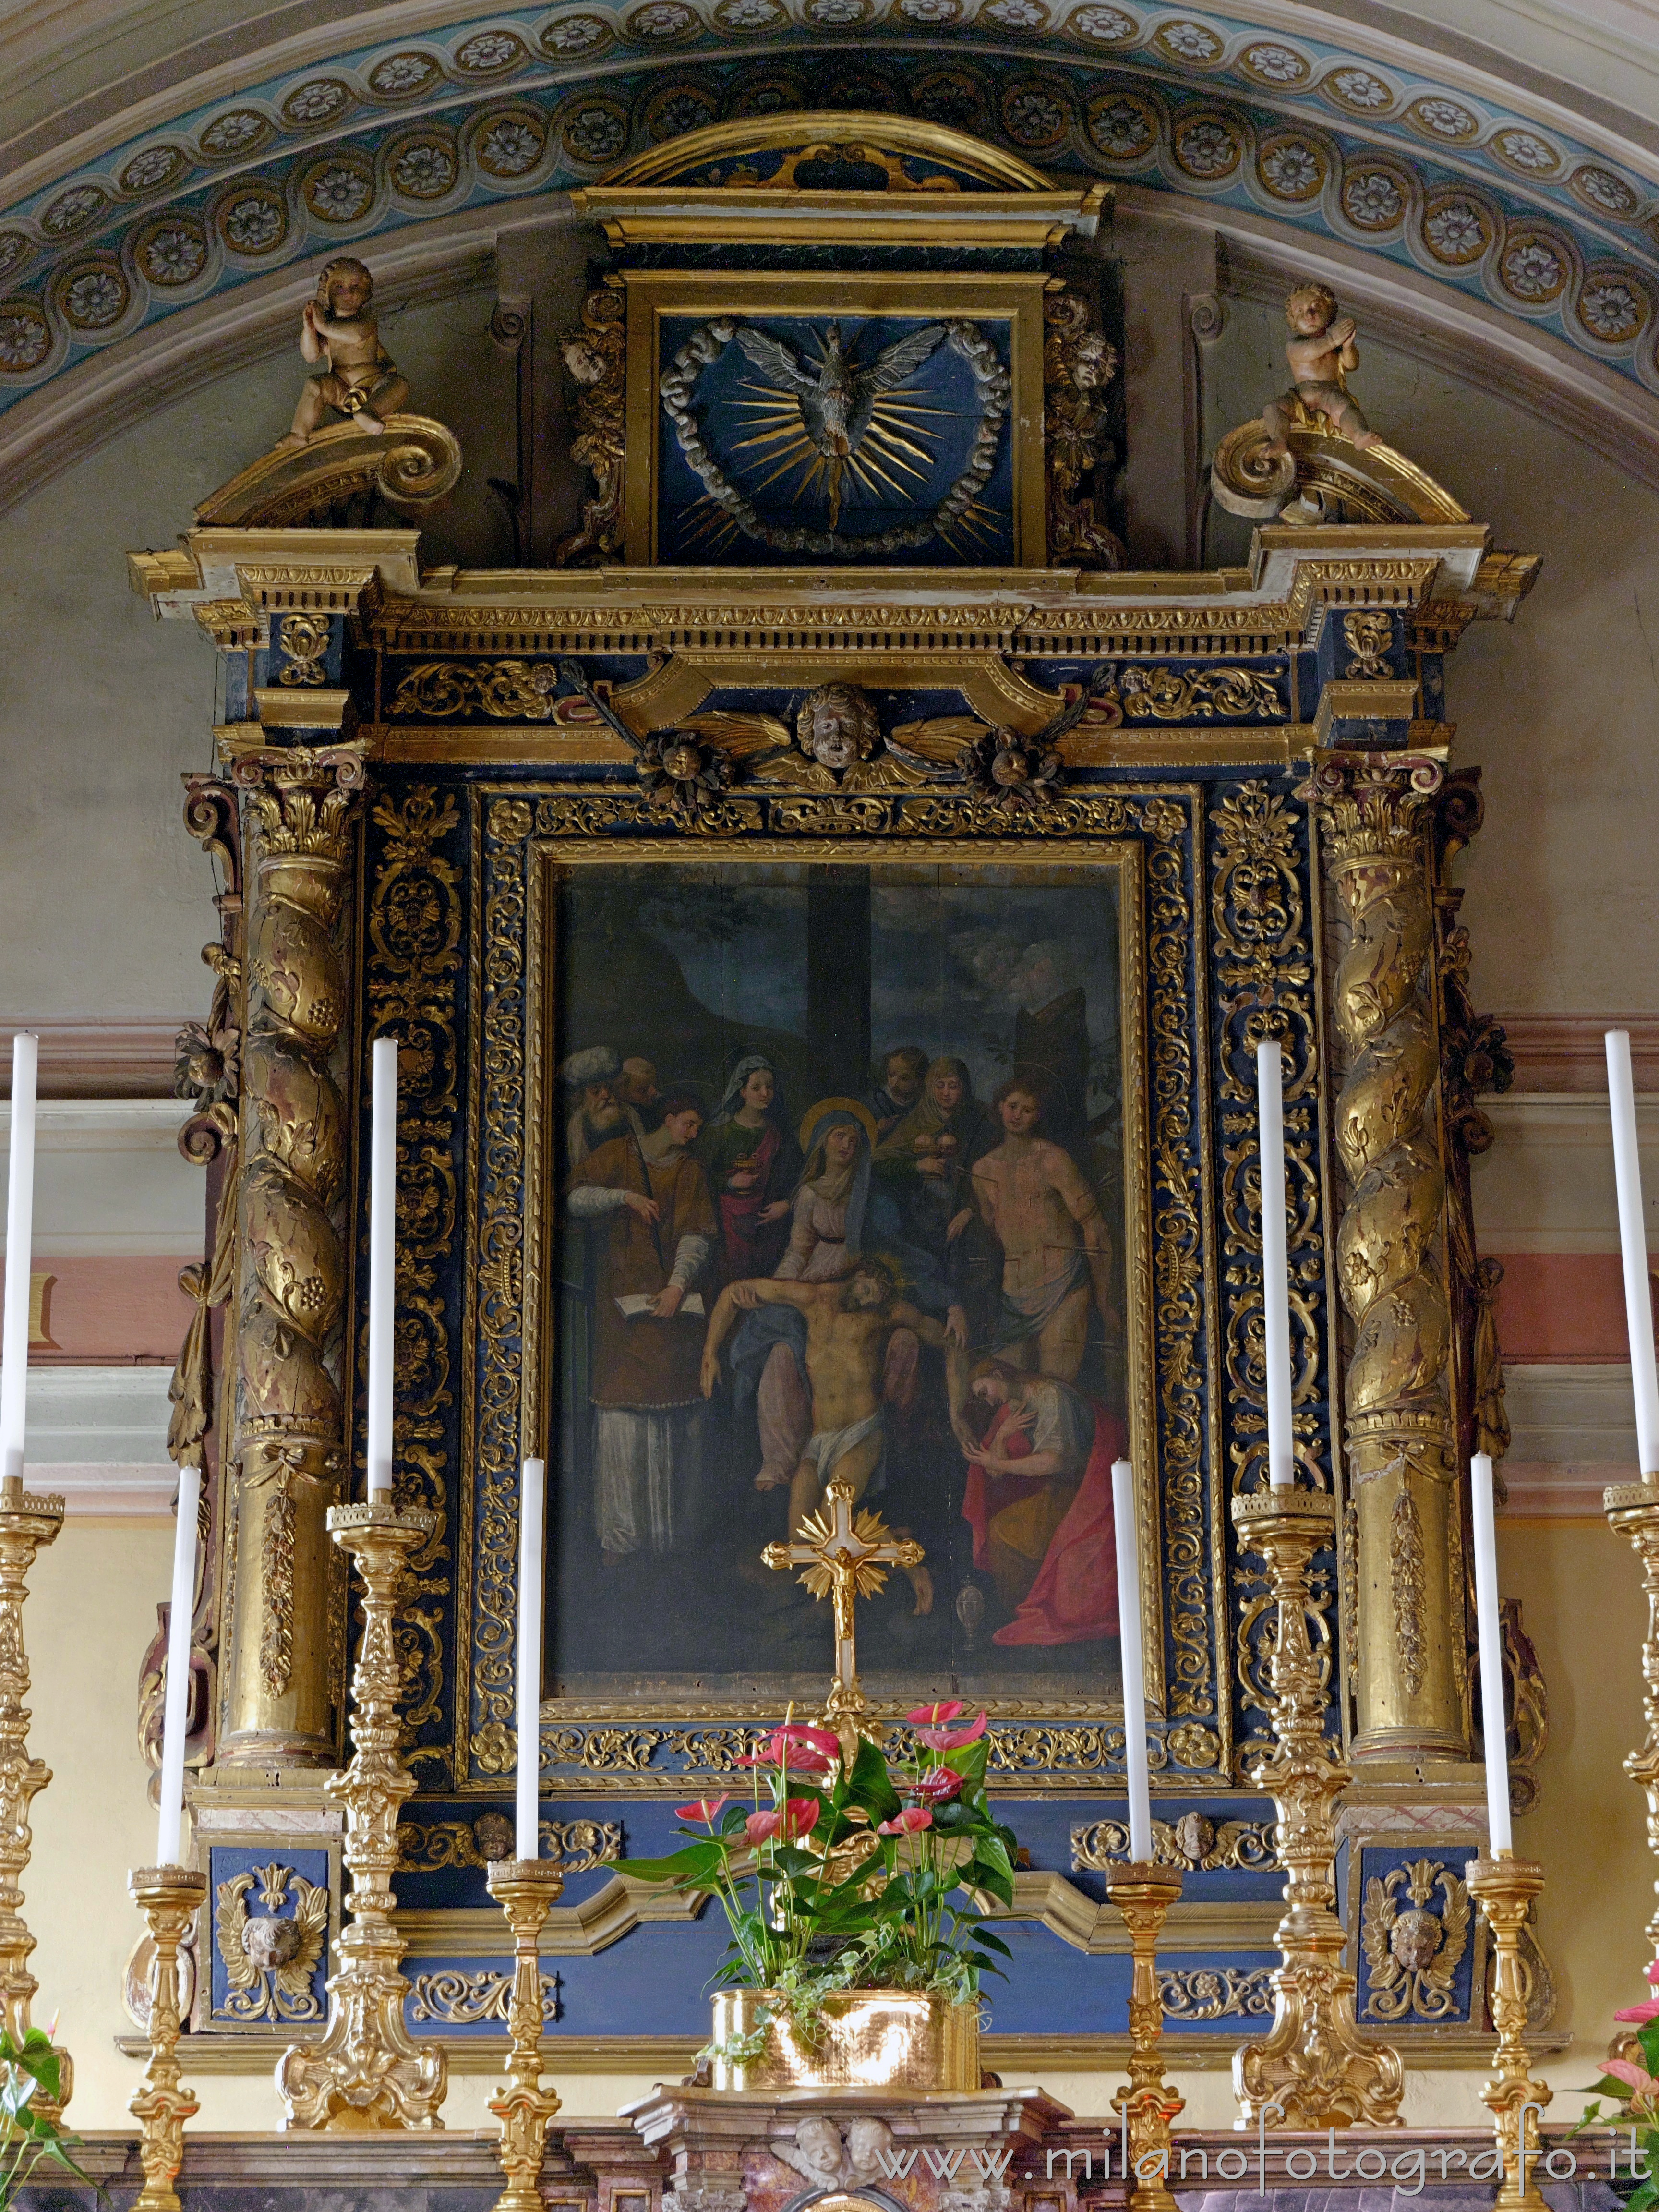 Ponderano (Biella, Italy): Retable on the back wall of the apse of the Church of St. Lawrence Martyr - Ponderano (Biella, Italy)